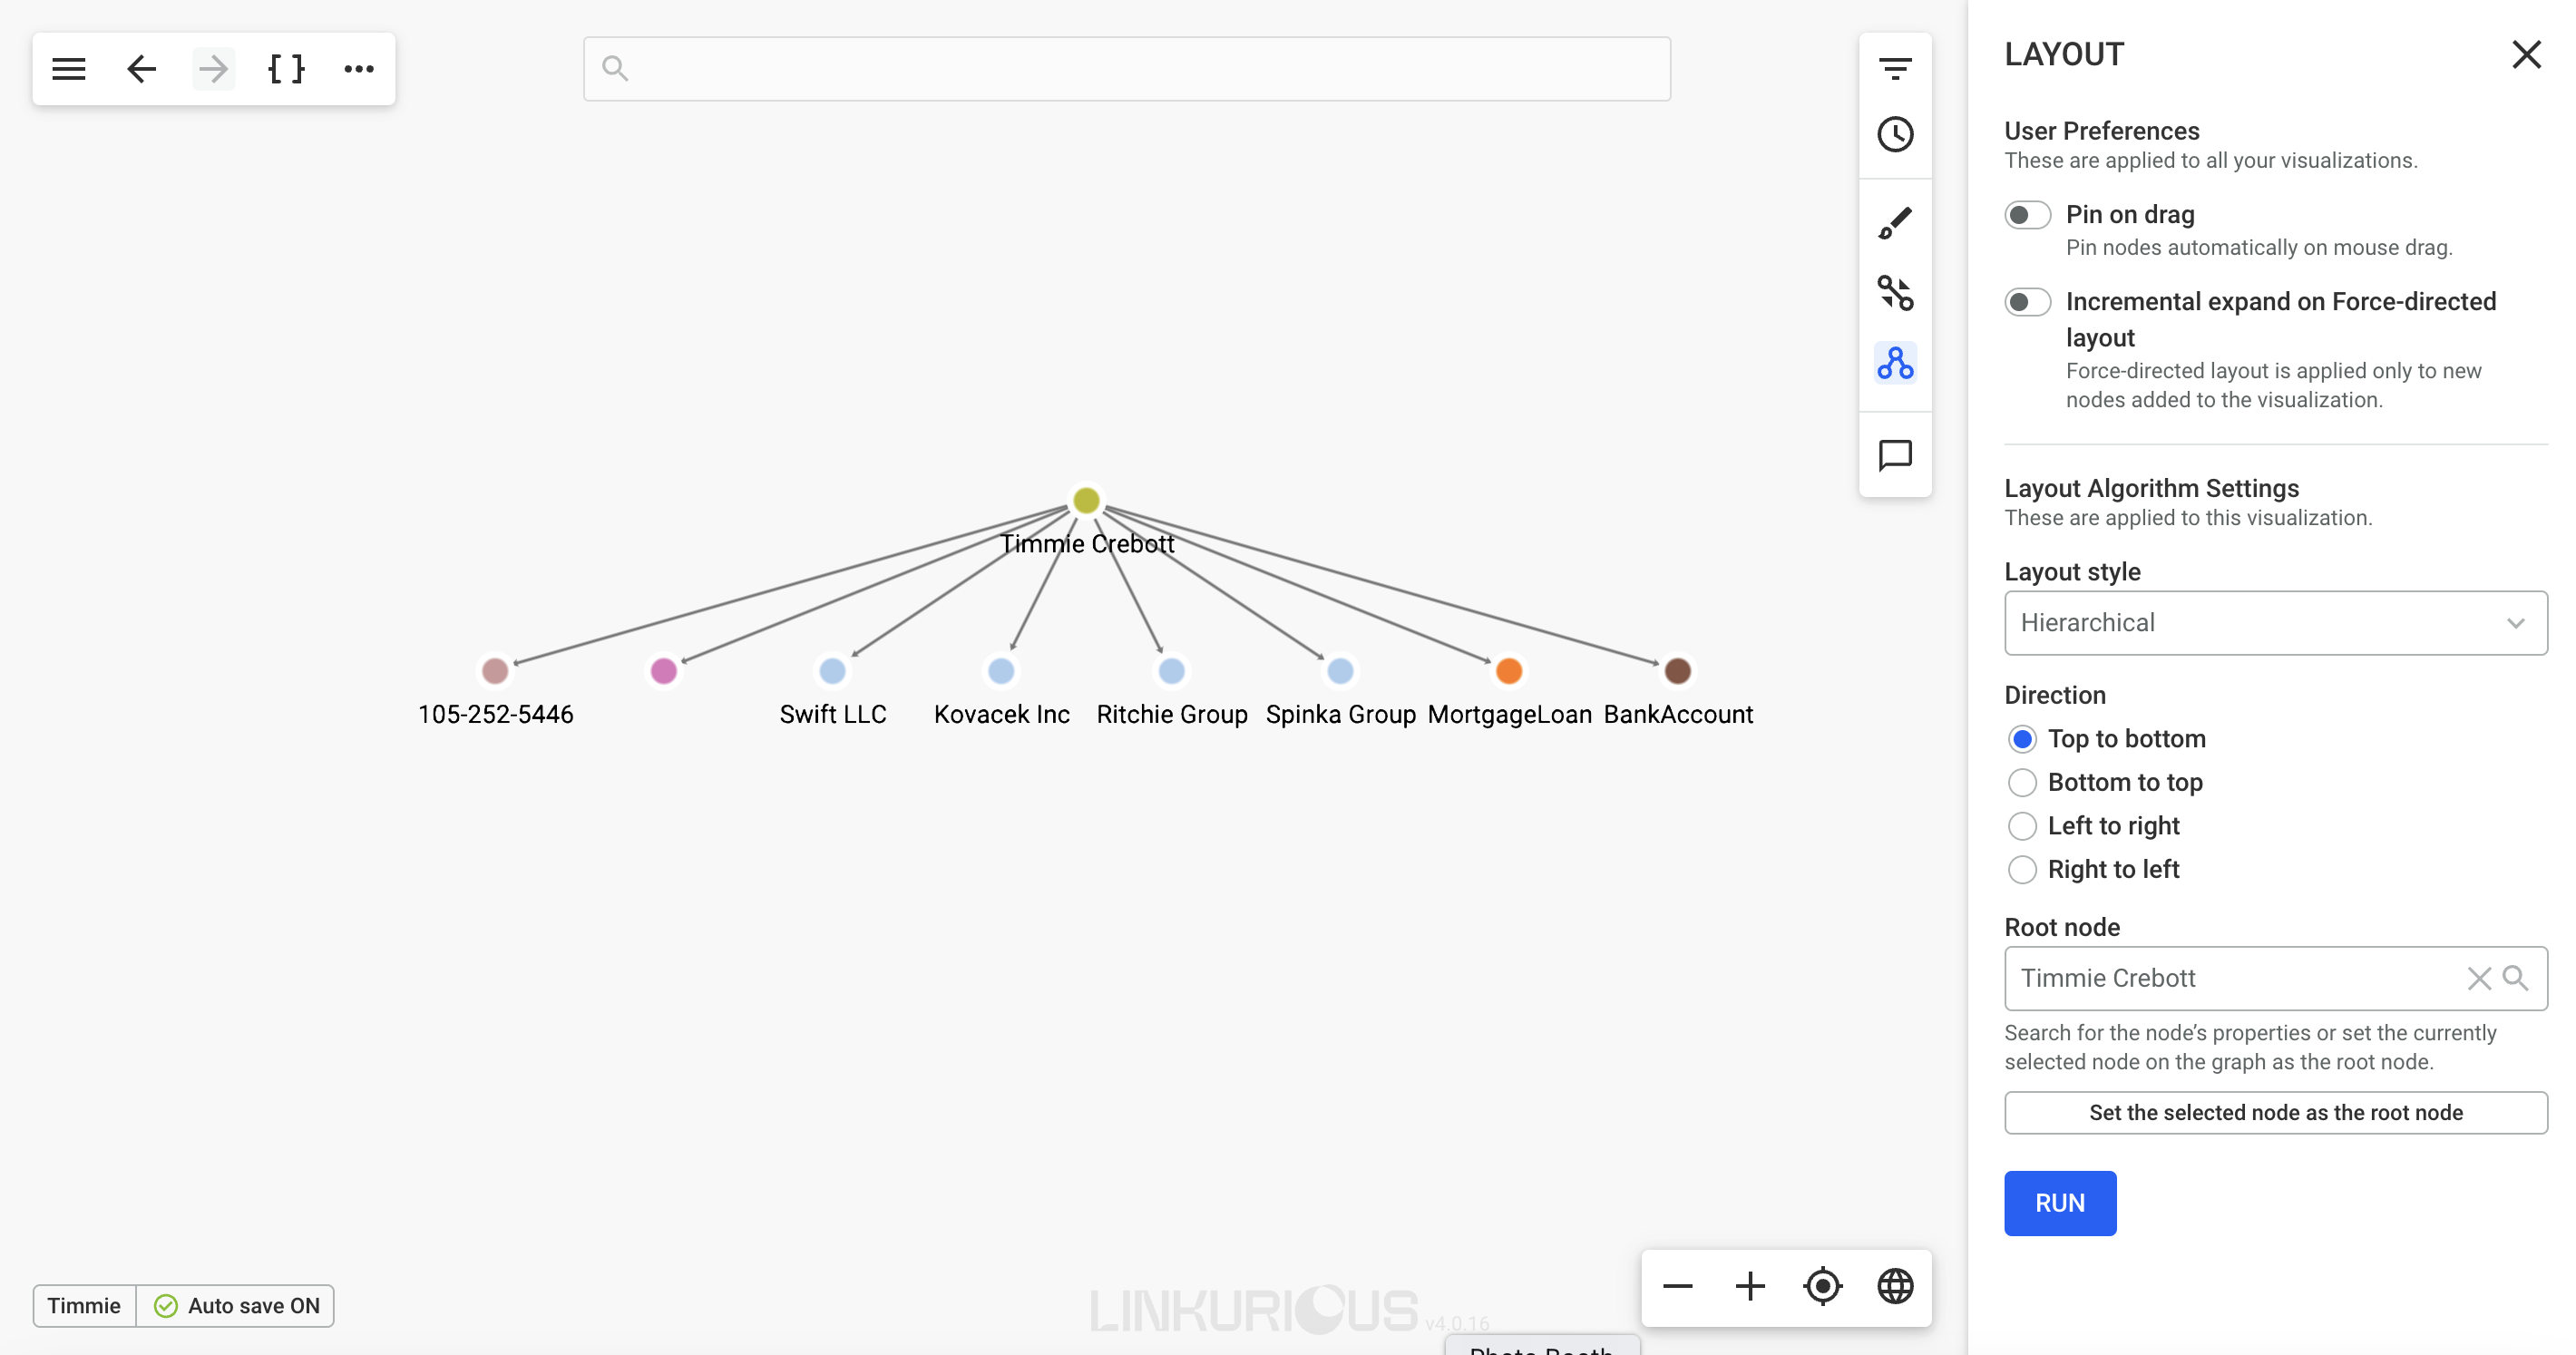 hierarchical graph visualization layout in Linkurious Enterprise